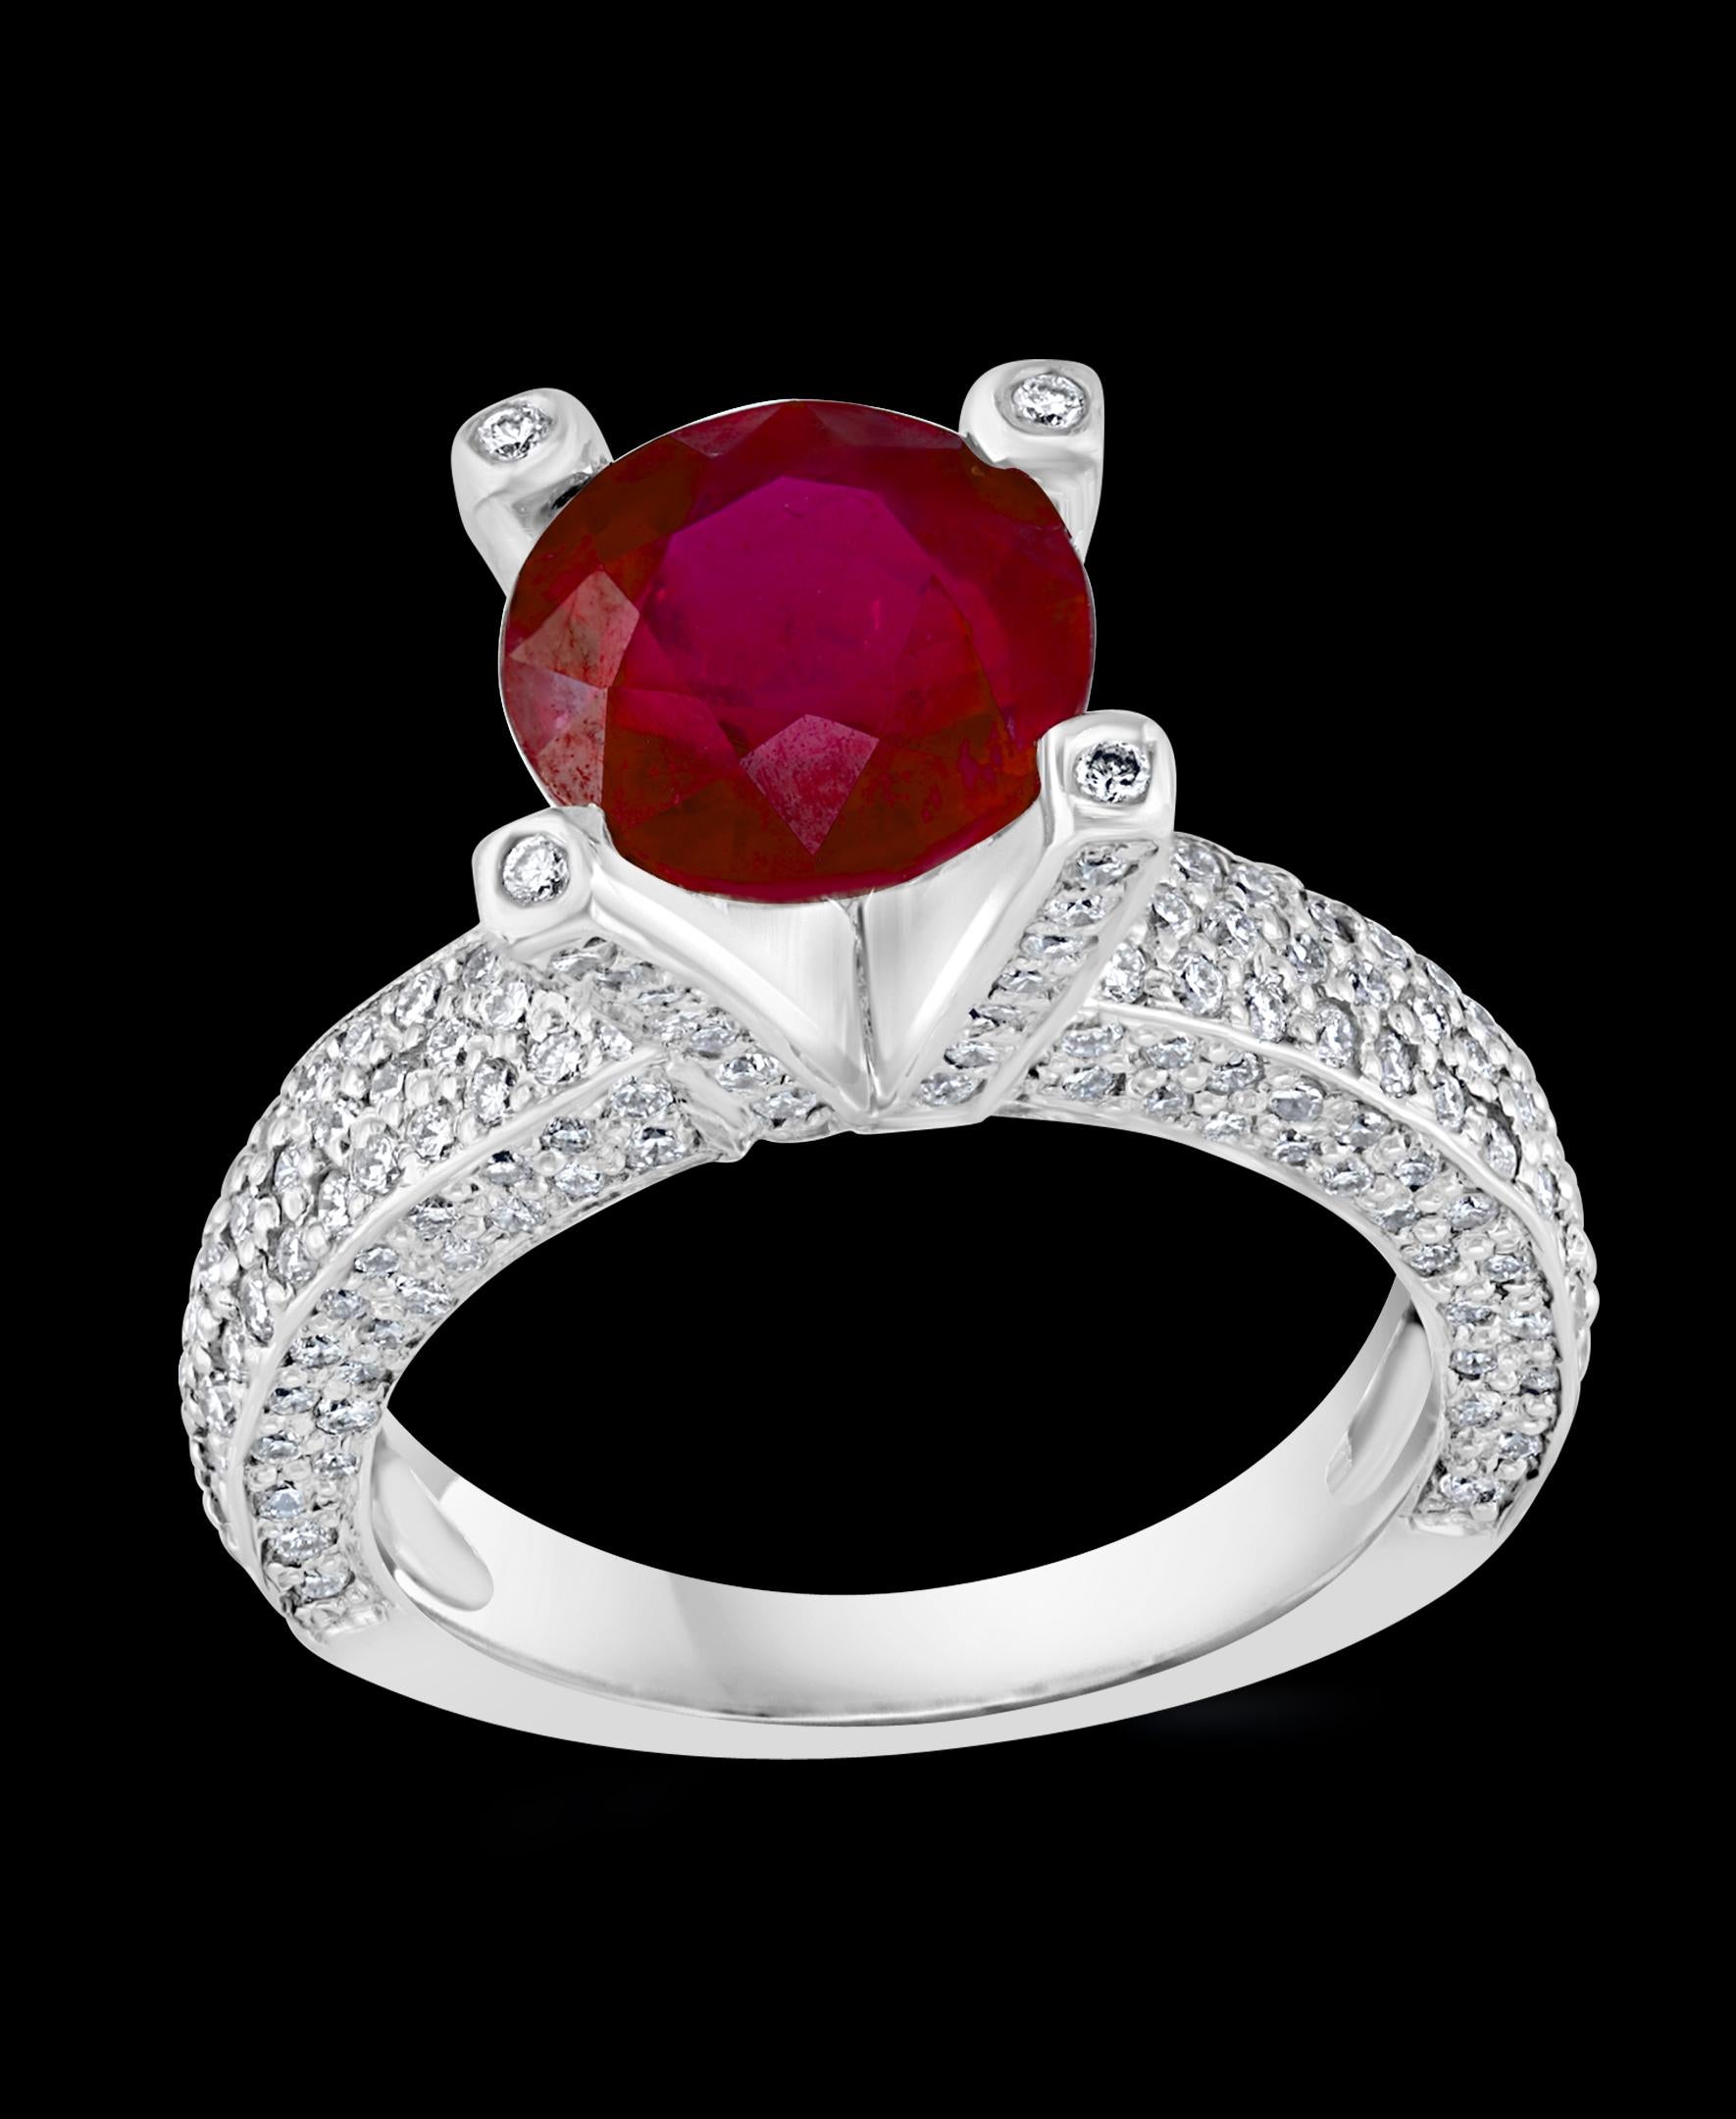 2 Carat Round Treated Ruby And Diamond Platinum Ring Size 4
 prong set
Platinum 7.3 Grams
Really small size ring
Ring Size 4( can be altered for no charge )
Large 2 carat Round shape ruby  which is Treated,  surrounded by brilliant cut diamonds